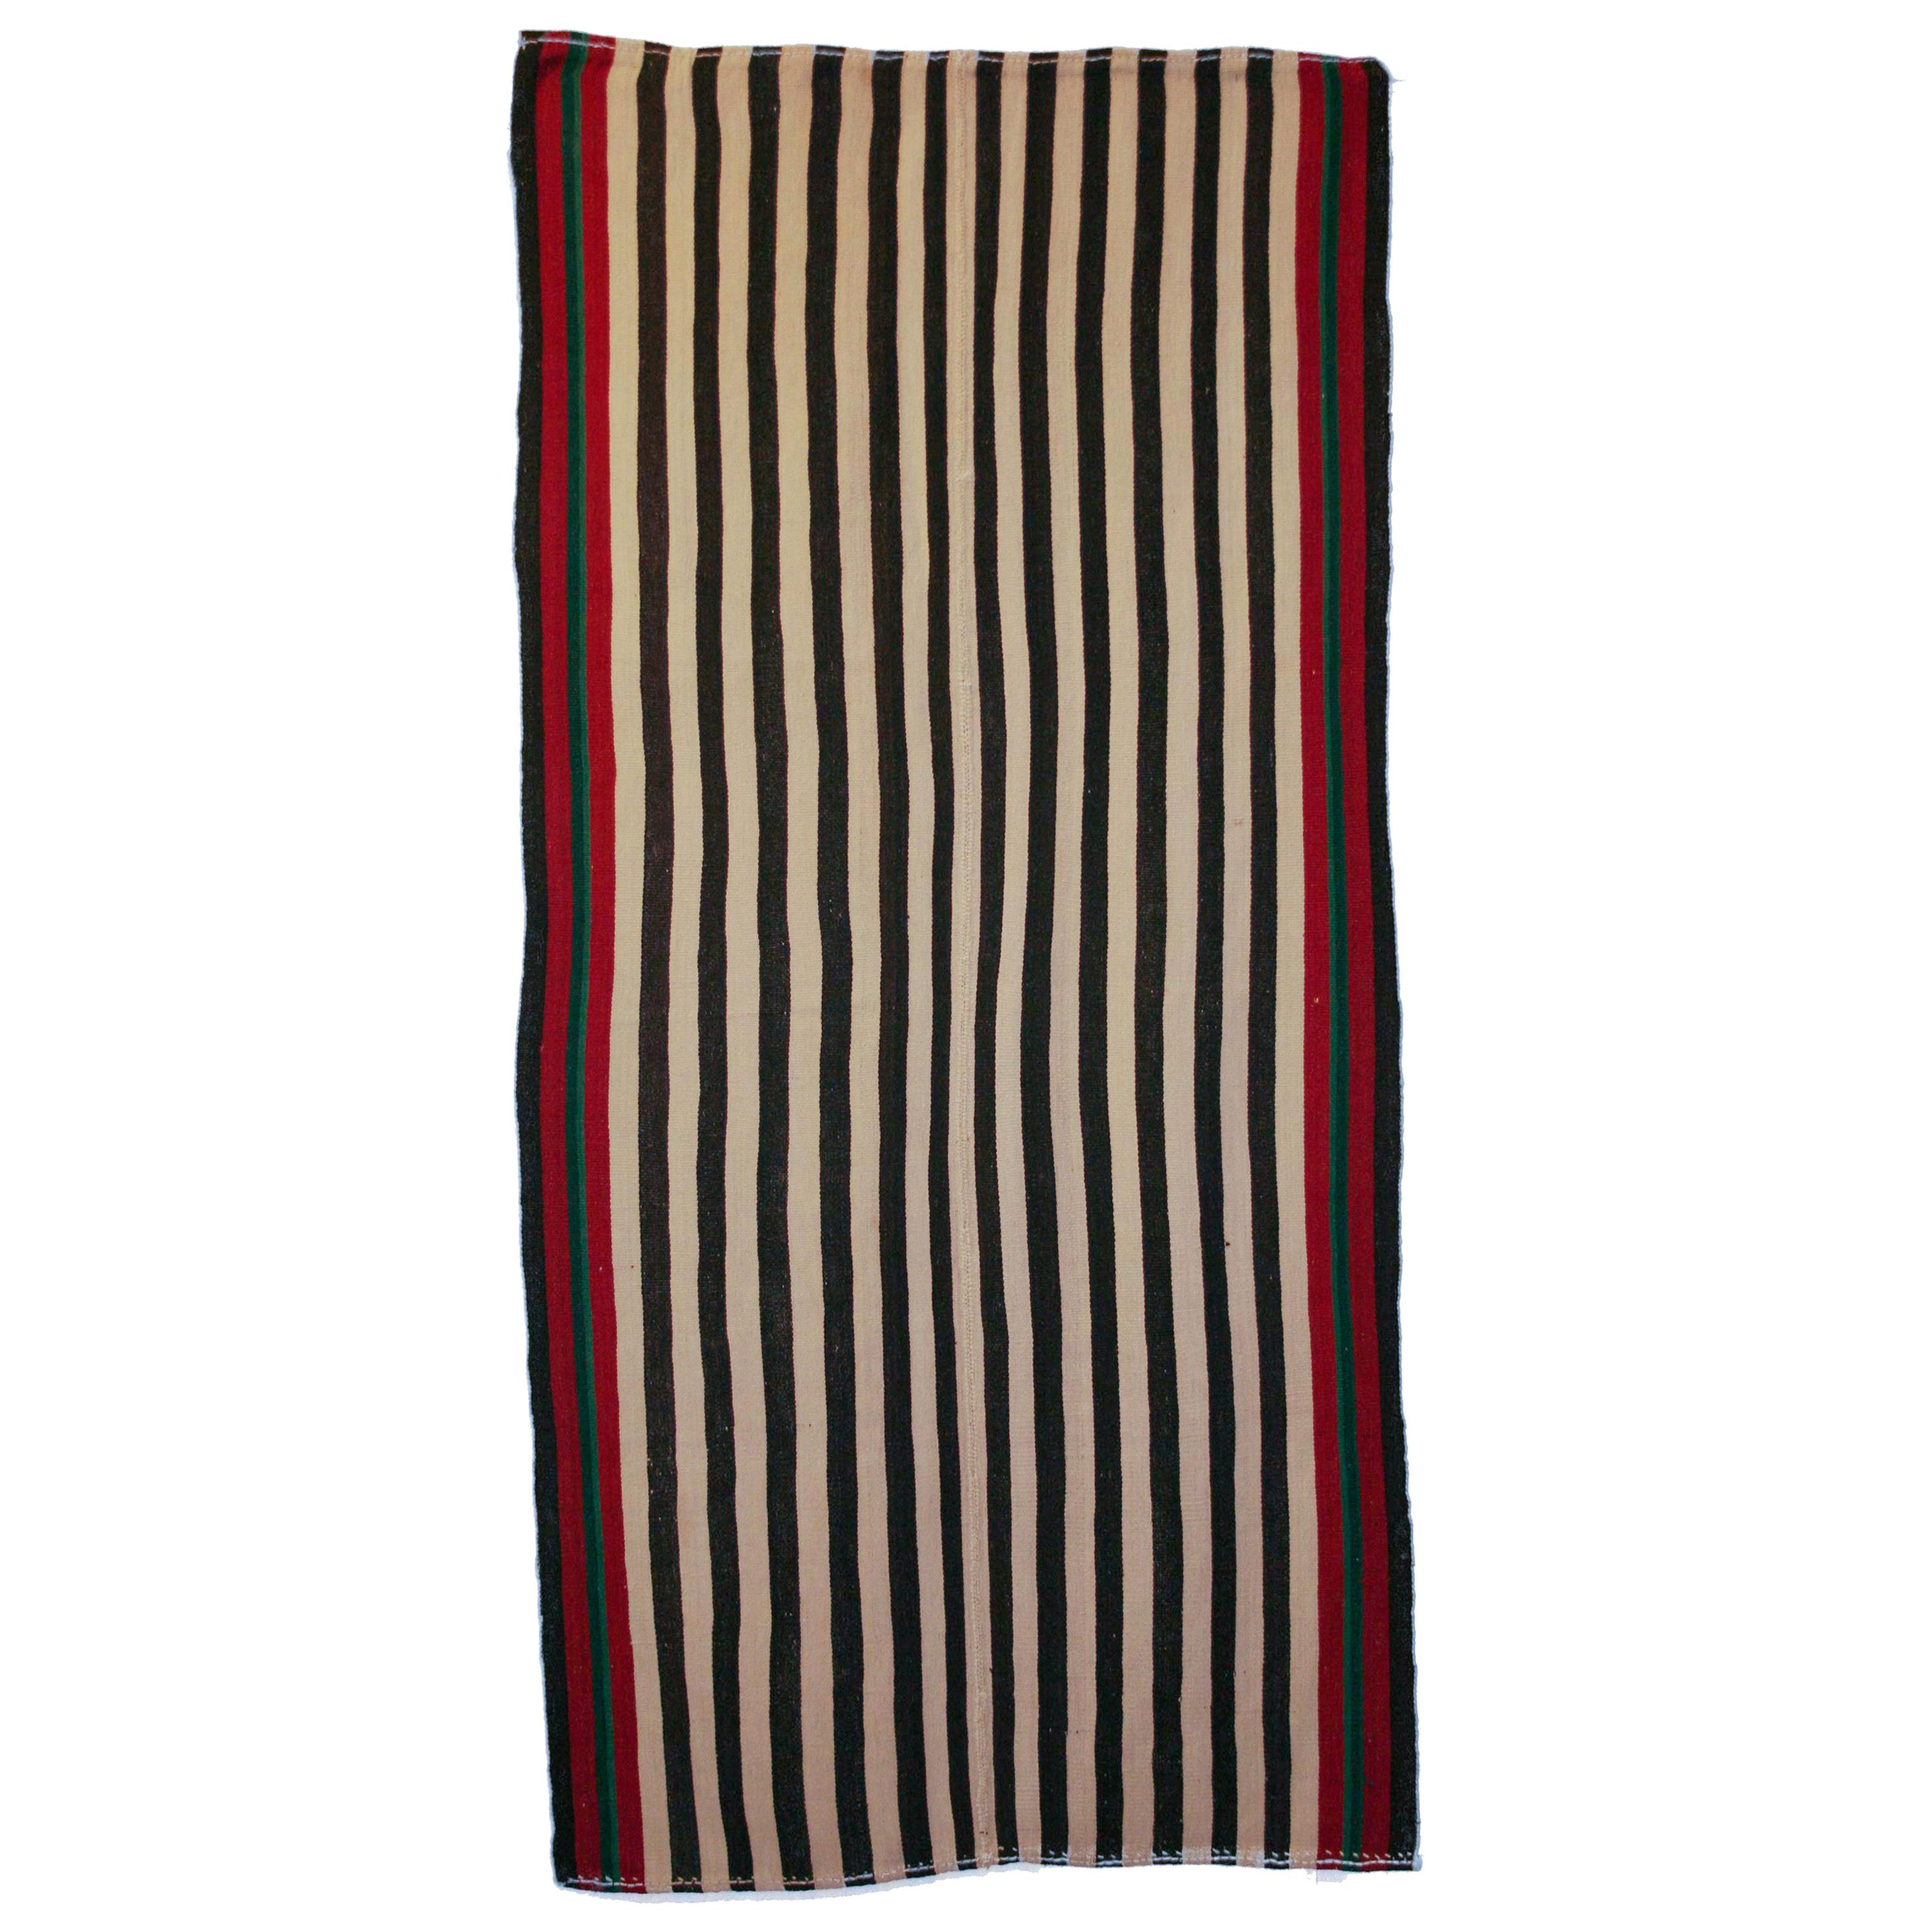 Antique Minimalist Jajim Flat-Woven Rug with Vertical Ivory/Green Stripes